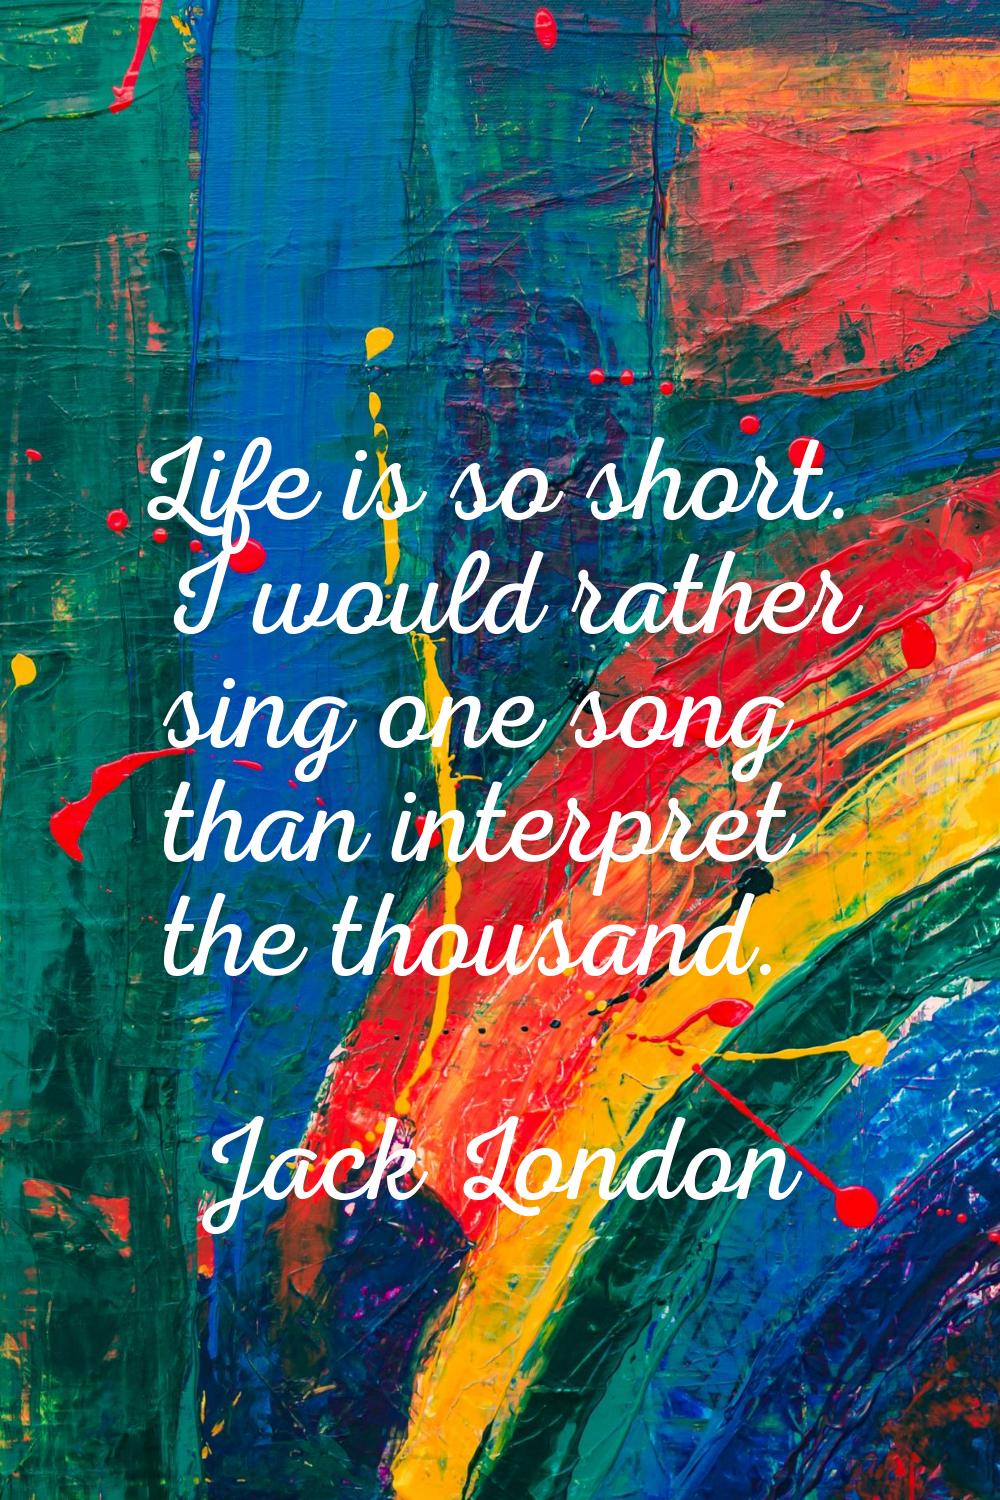 Life is so short. I would rather sing one song than interpret the thousand.